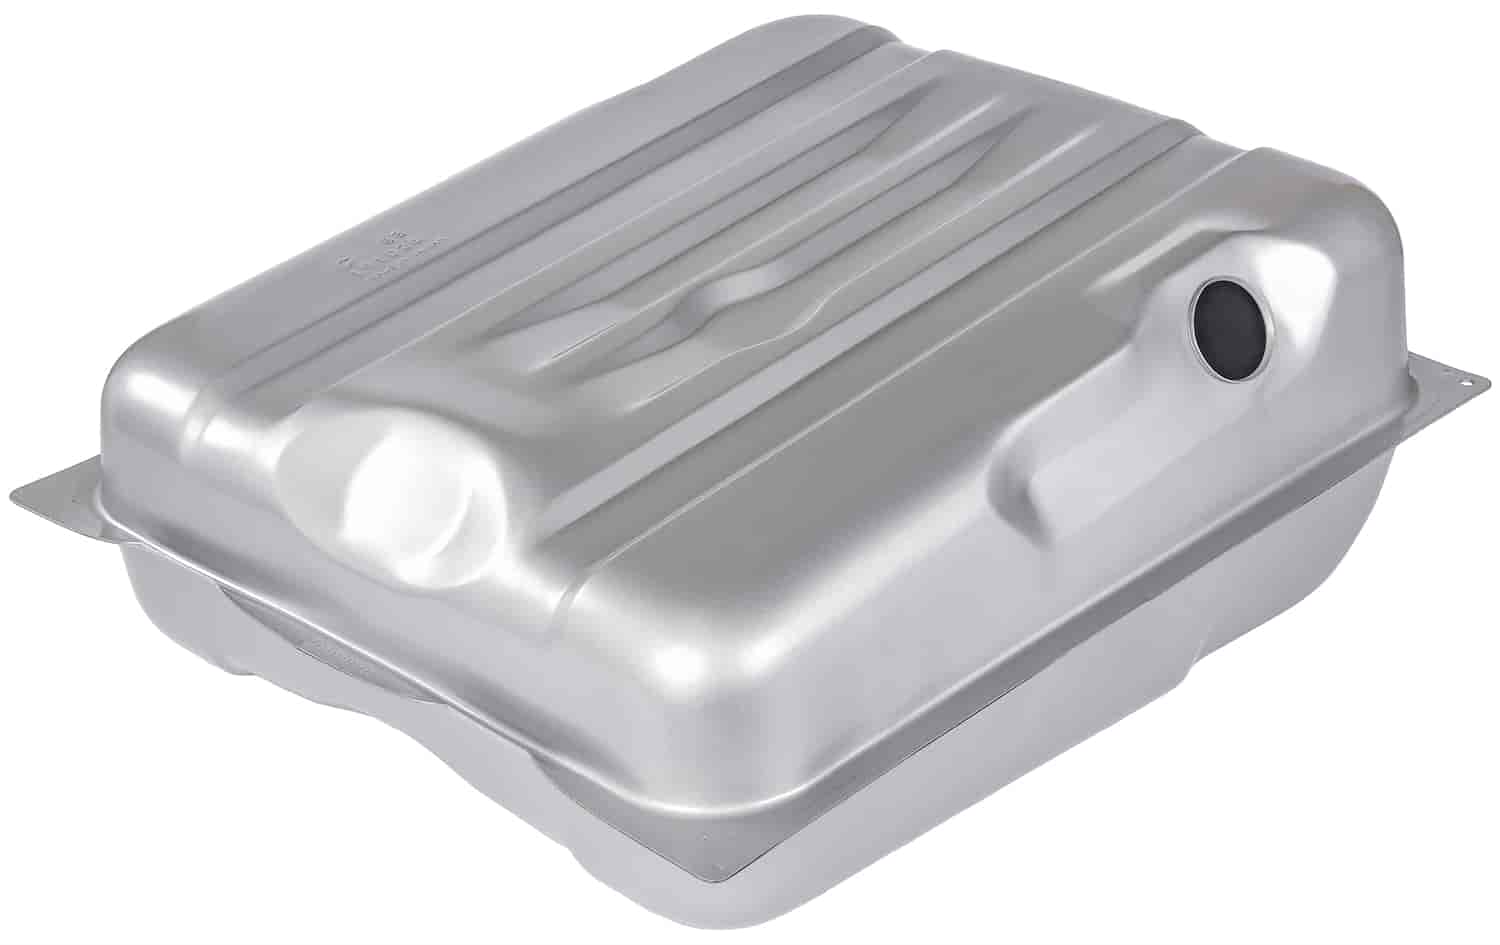 Fuel Tank for 1970 Challenger